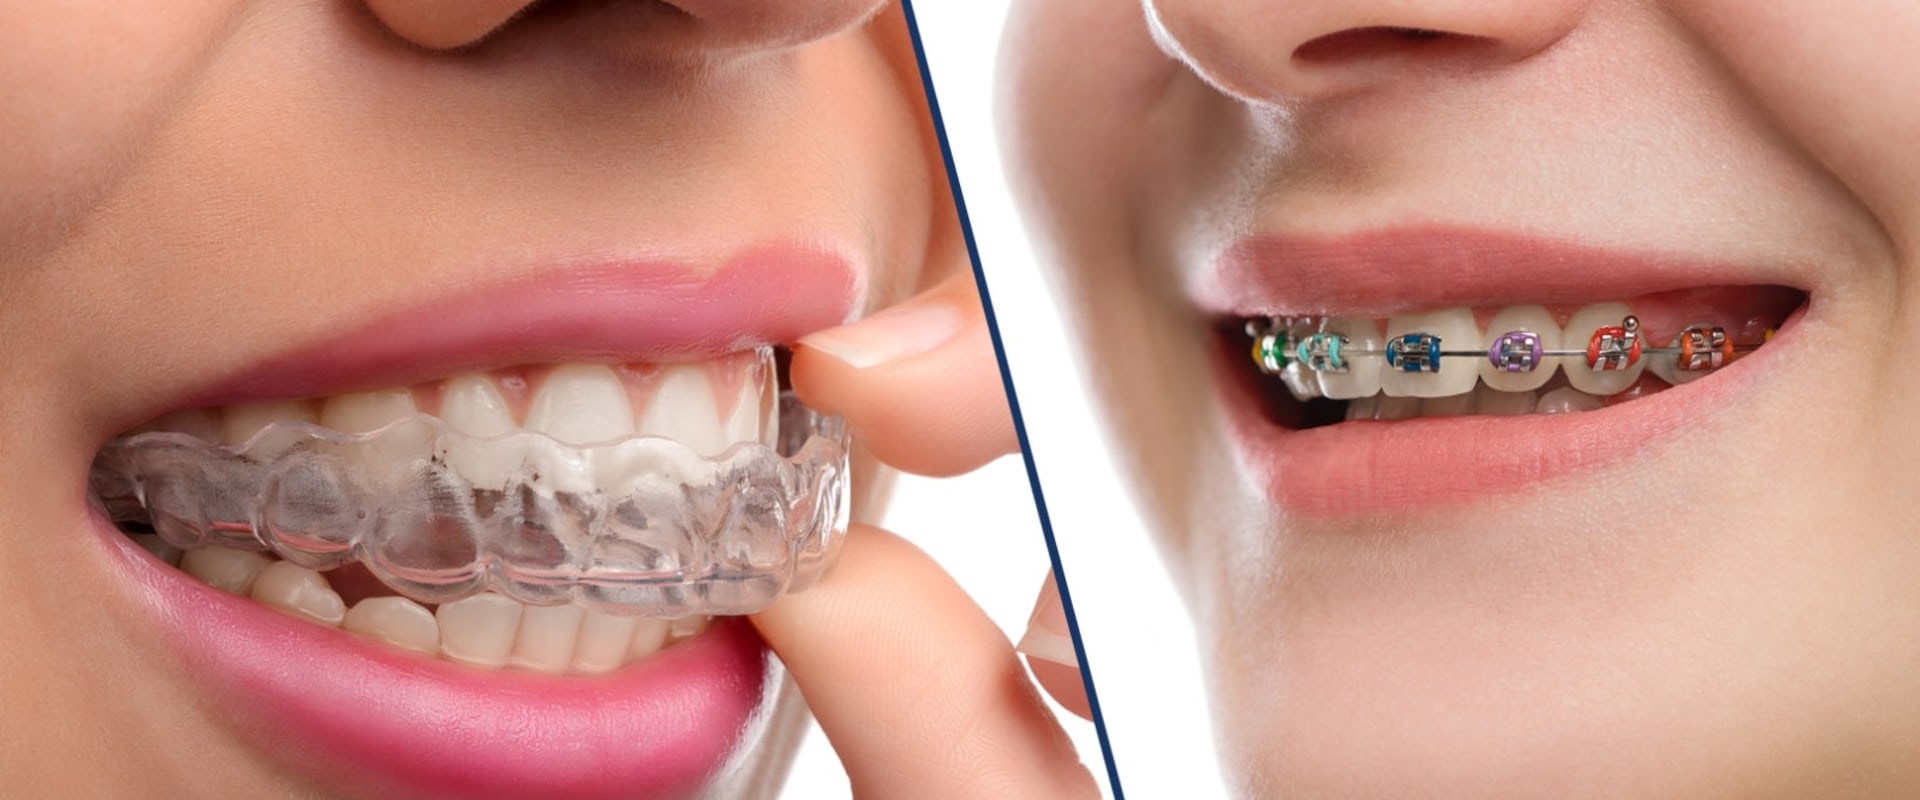 All You Need to Know About Clear Aligners (Invisalign)